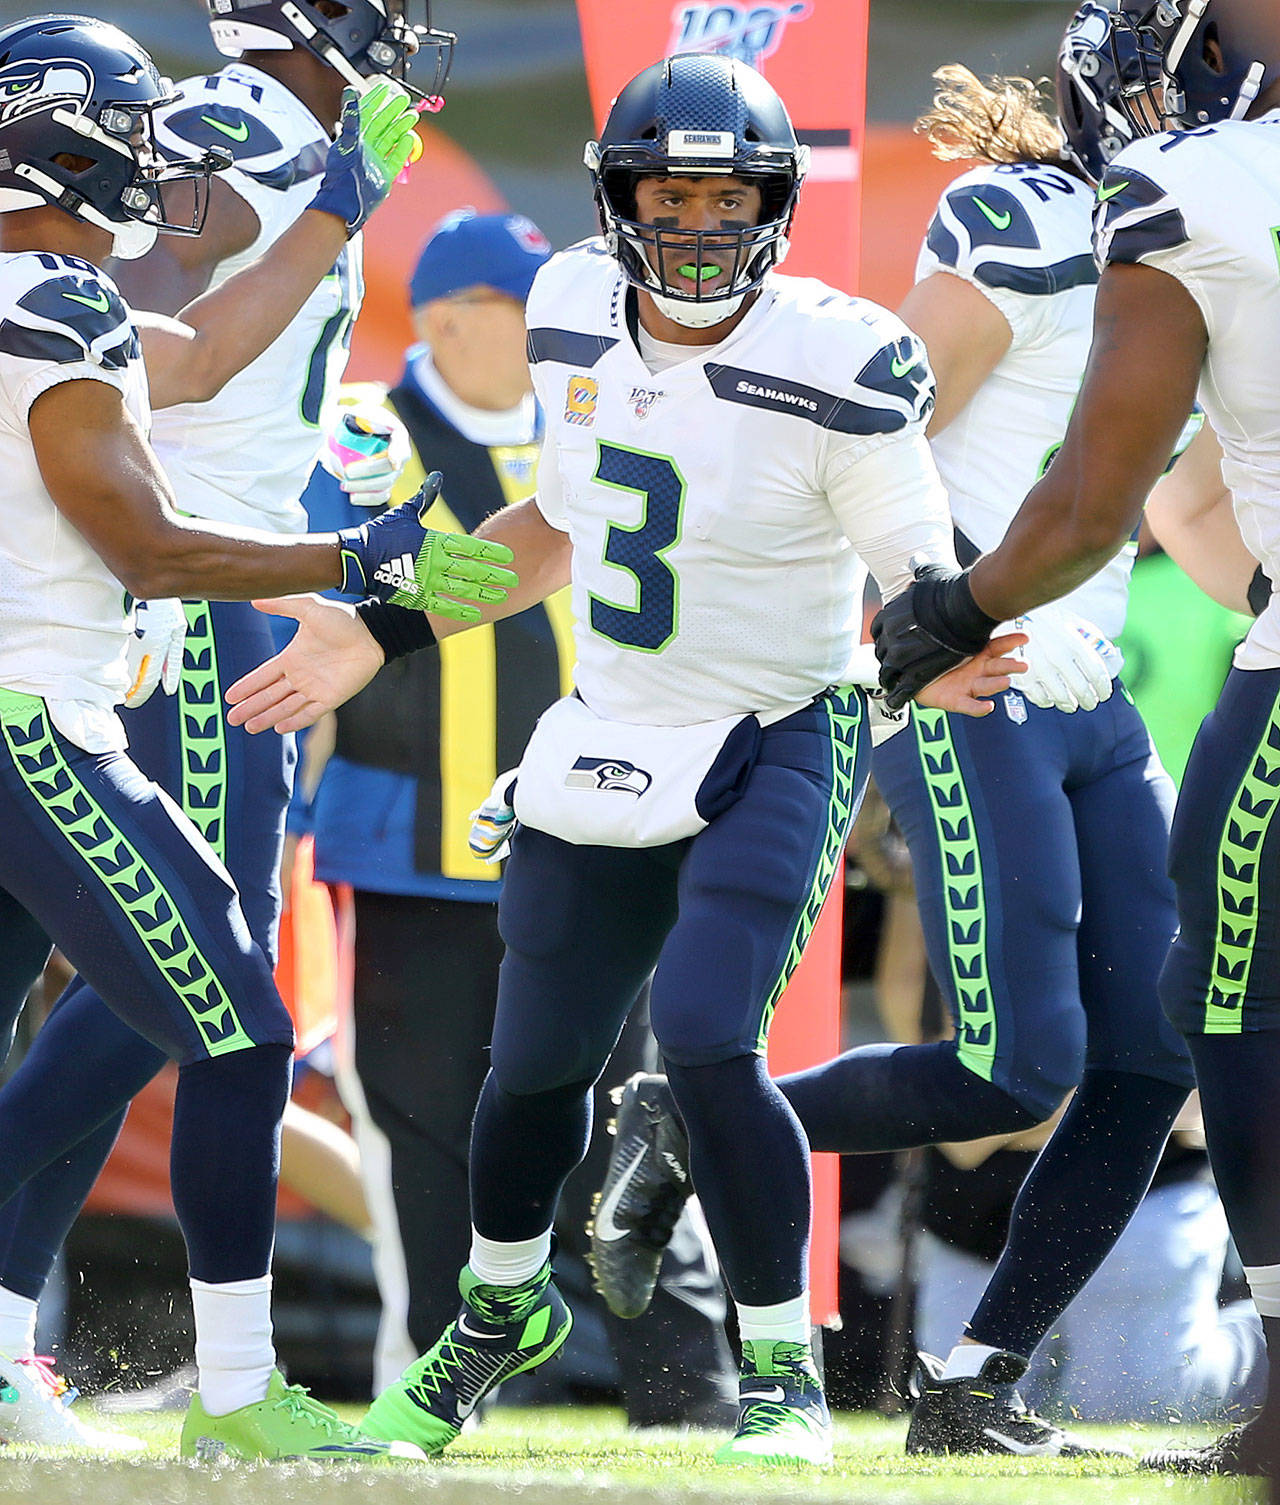 Best player in the NFL': Russell Wilson's MVP buzz heats up in